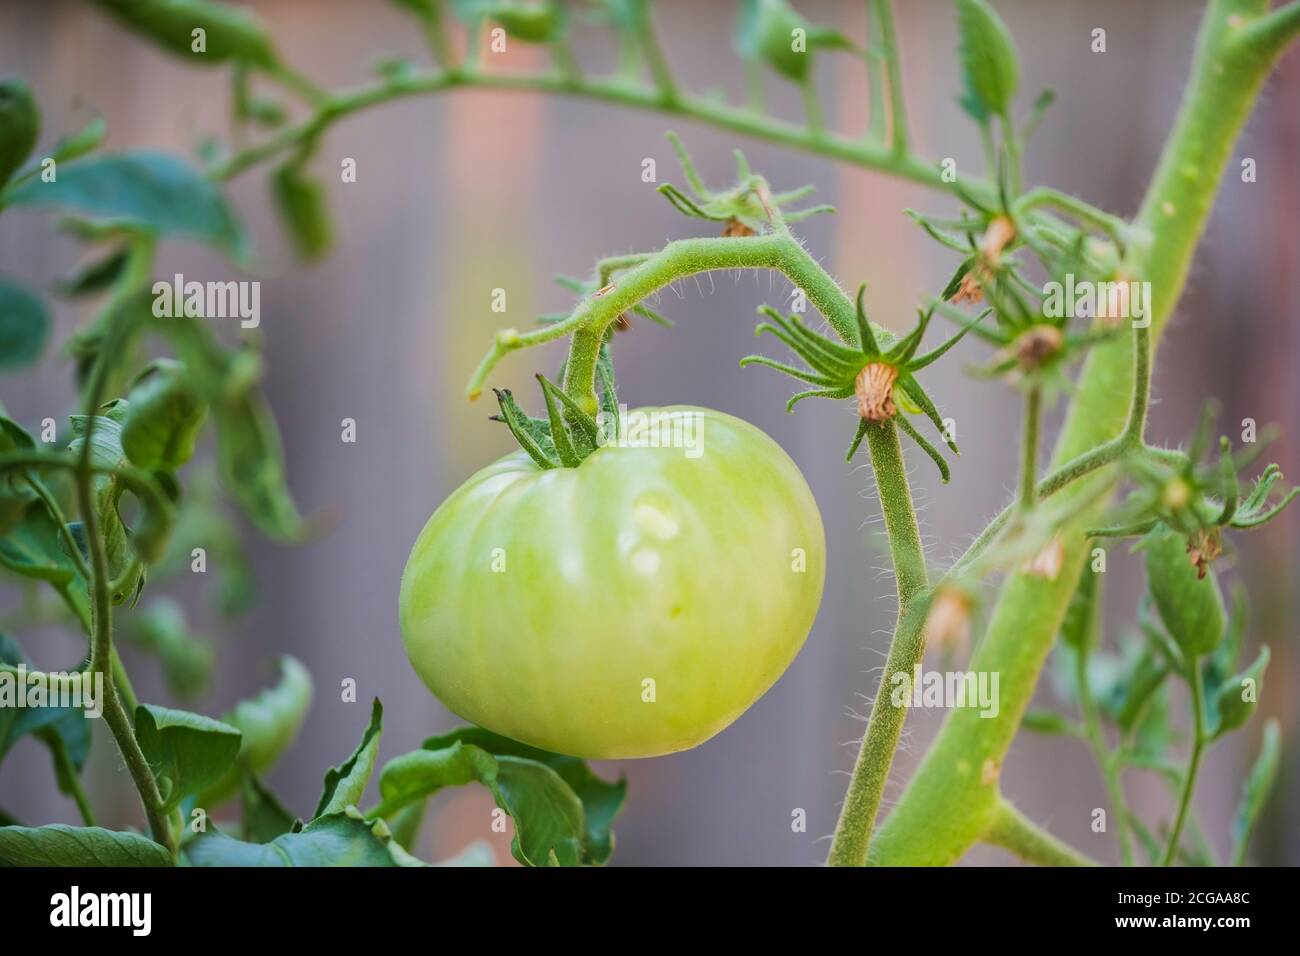 Closeup of a Beefmaster tomato with the leaves showing leaf curl most likely from extreme heat. Kansas, USA. Stock Photo